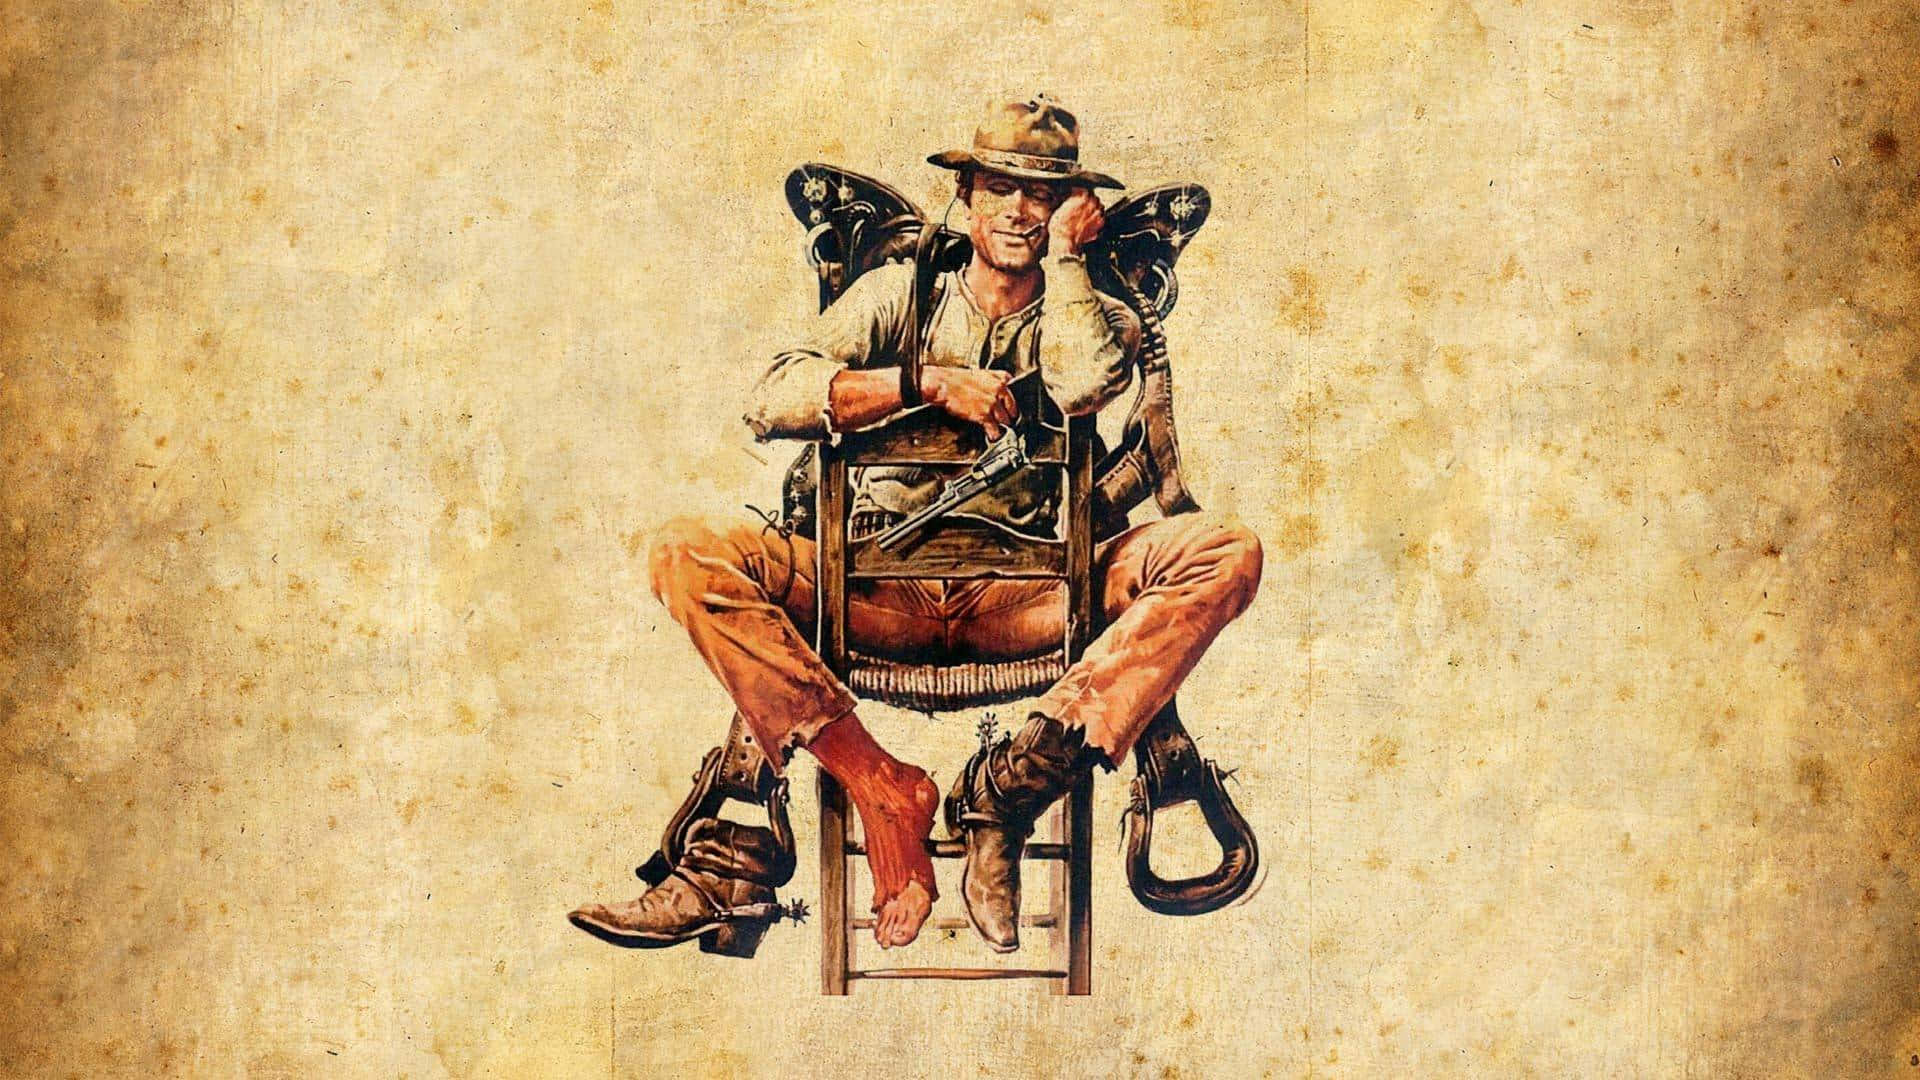 Cute Western Pictures Wallpaper